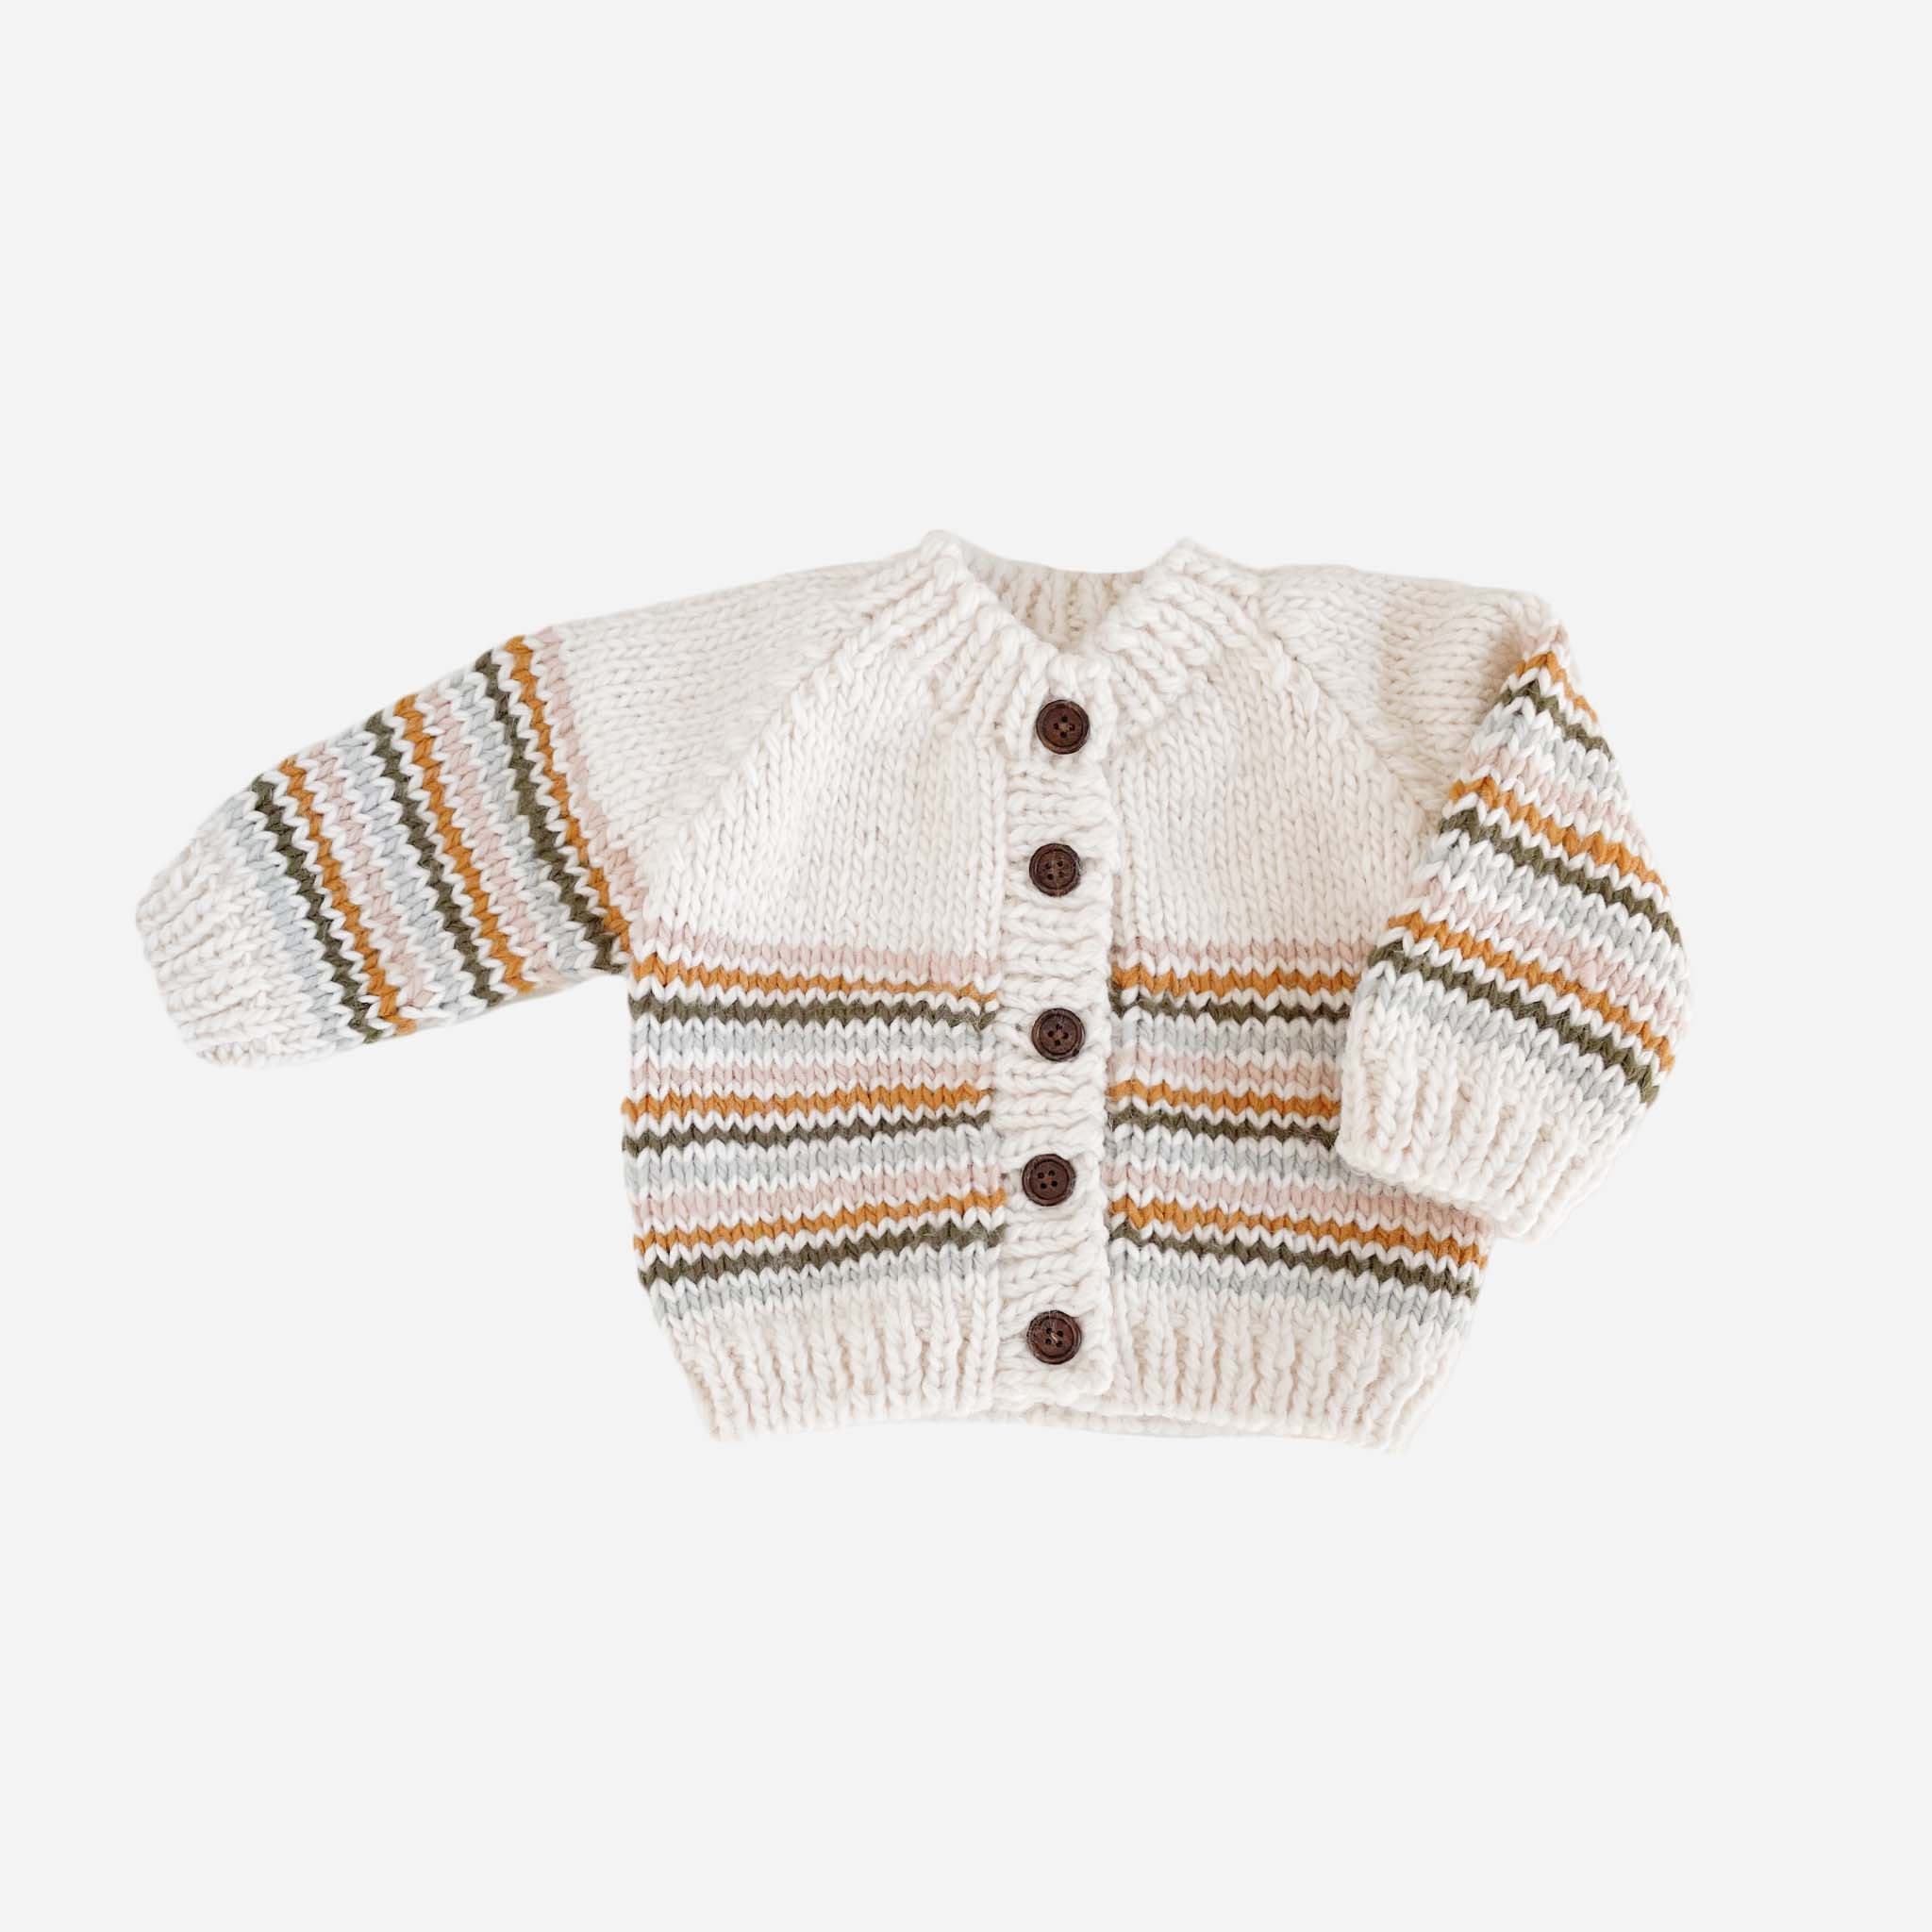 Silver Cloud 100% Cotton Sweater Knit Colorful Rainbow Stripe Baby